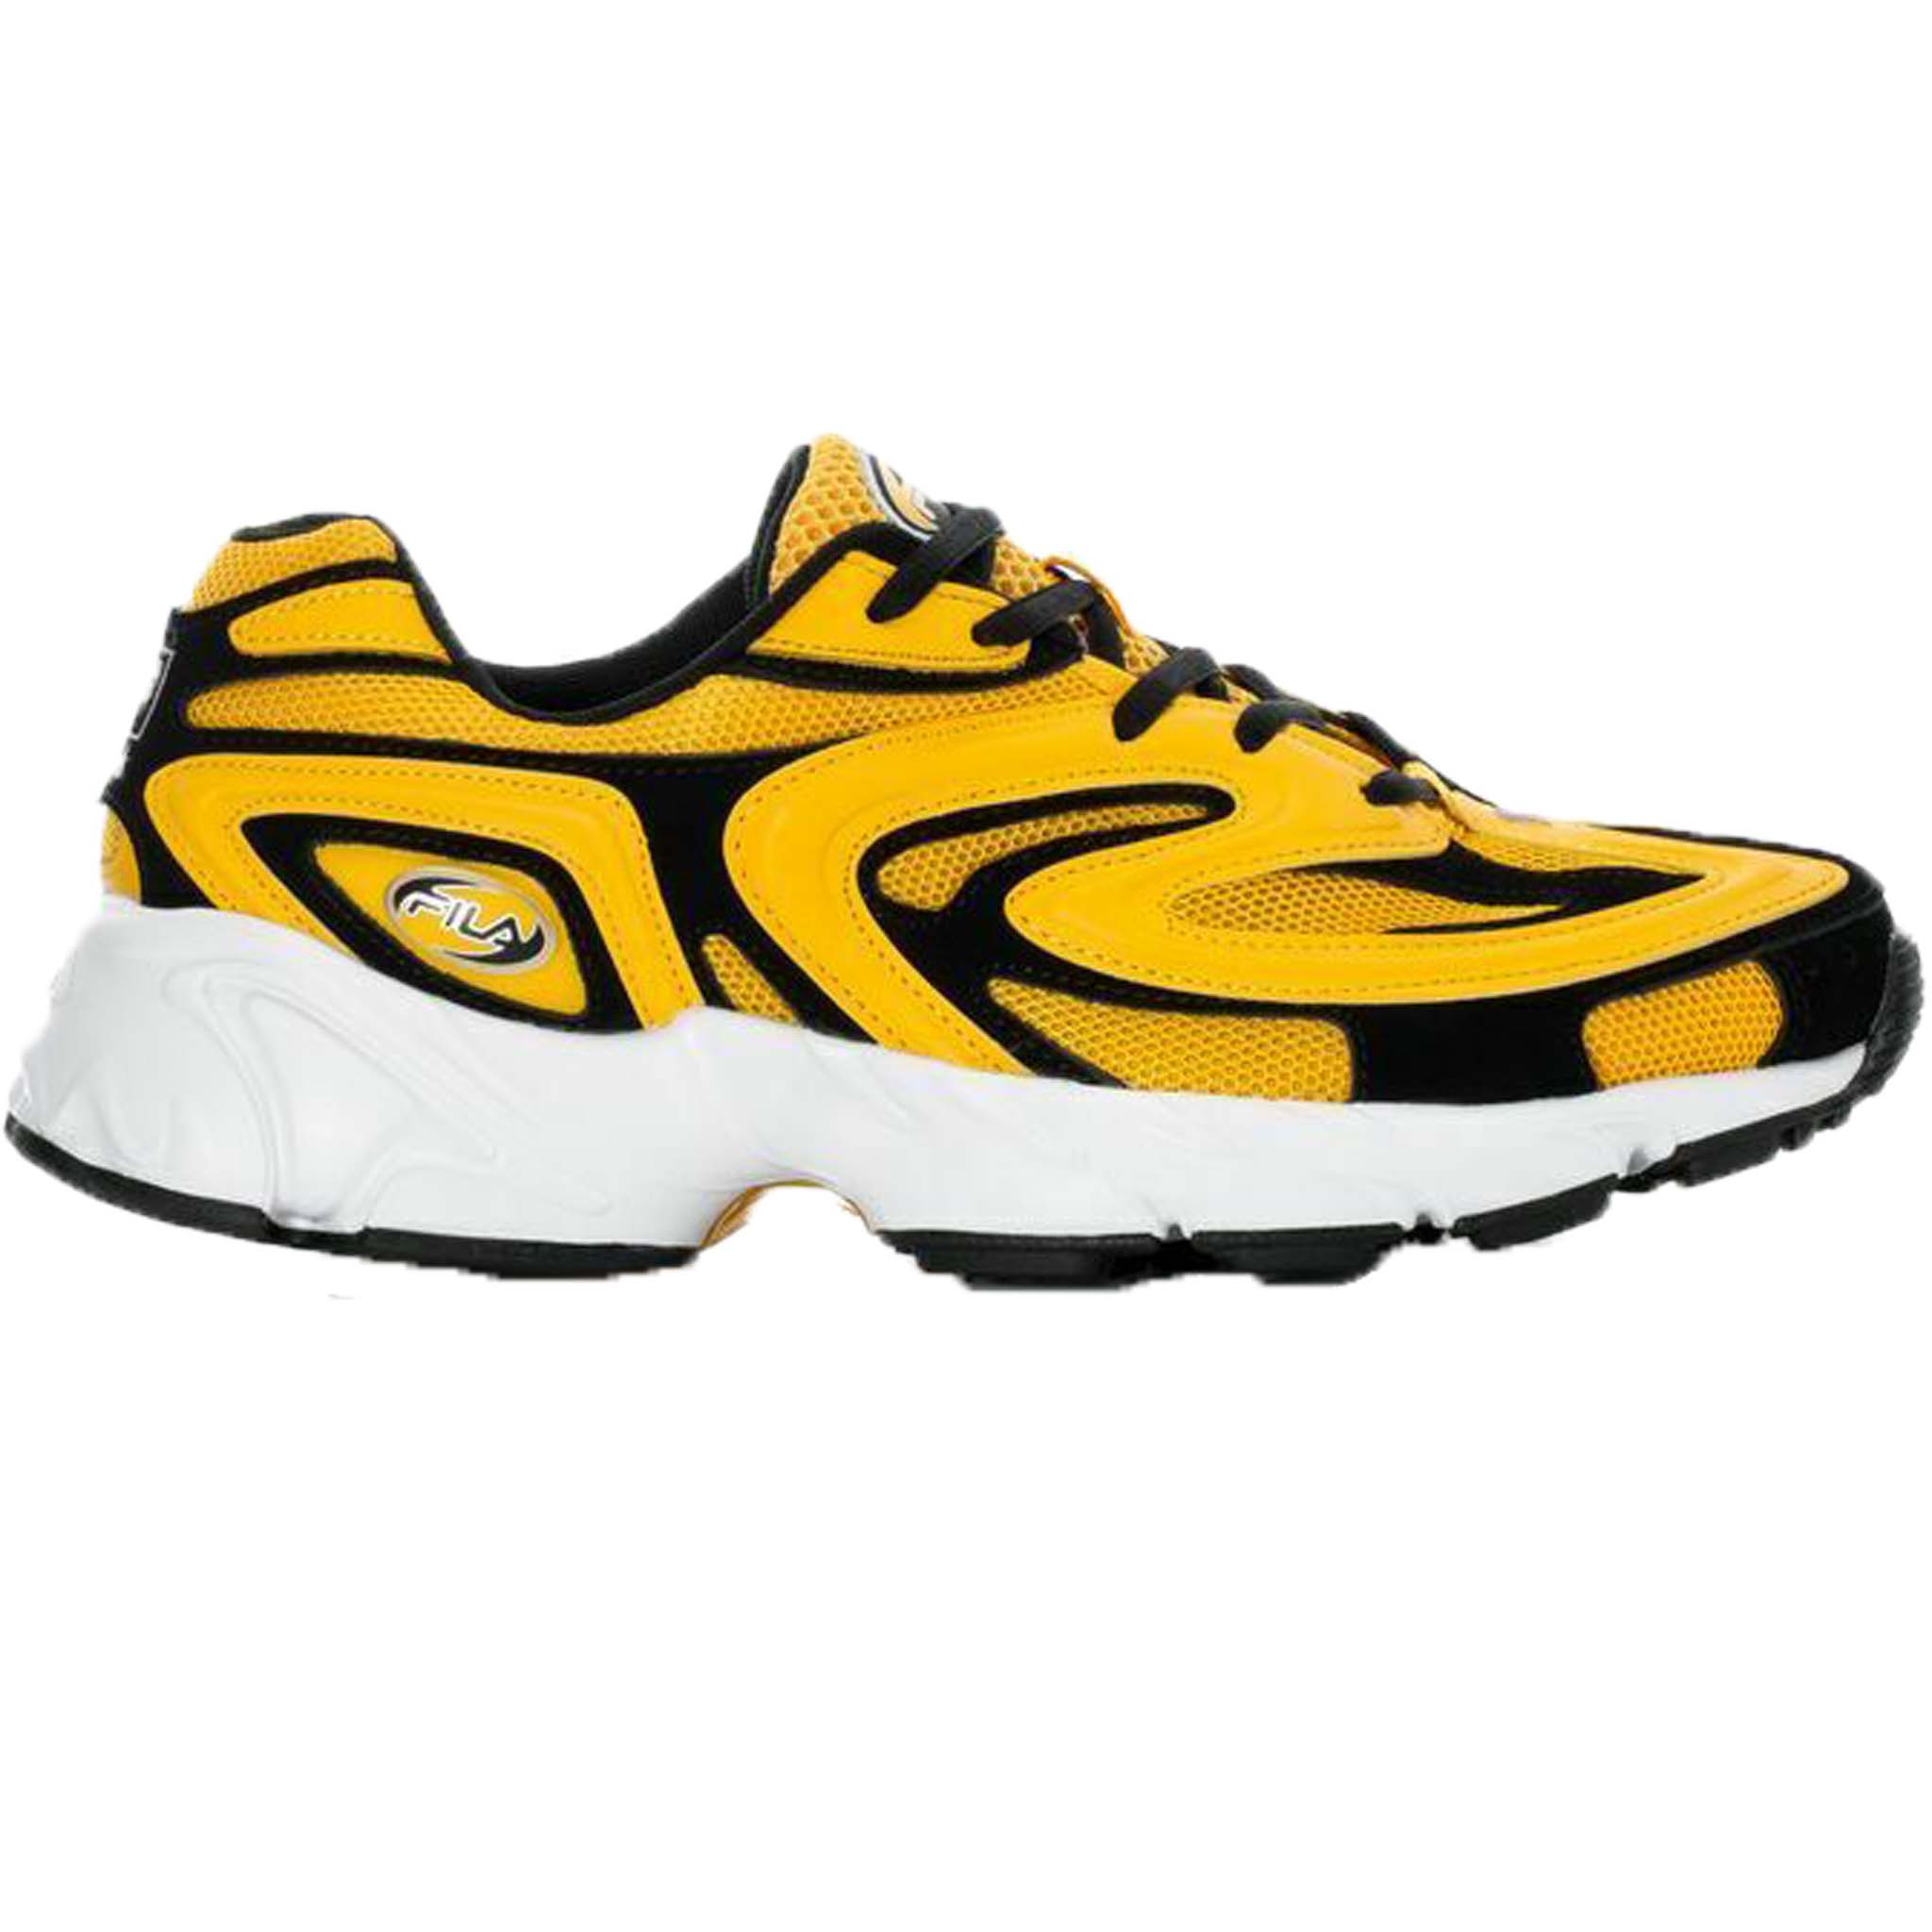 Fila Men's Creator Casual Heritage Running Shoes Yellow Black – That Shoe and More